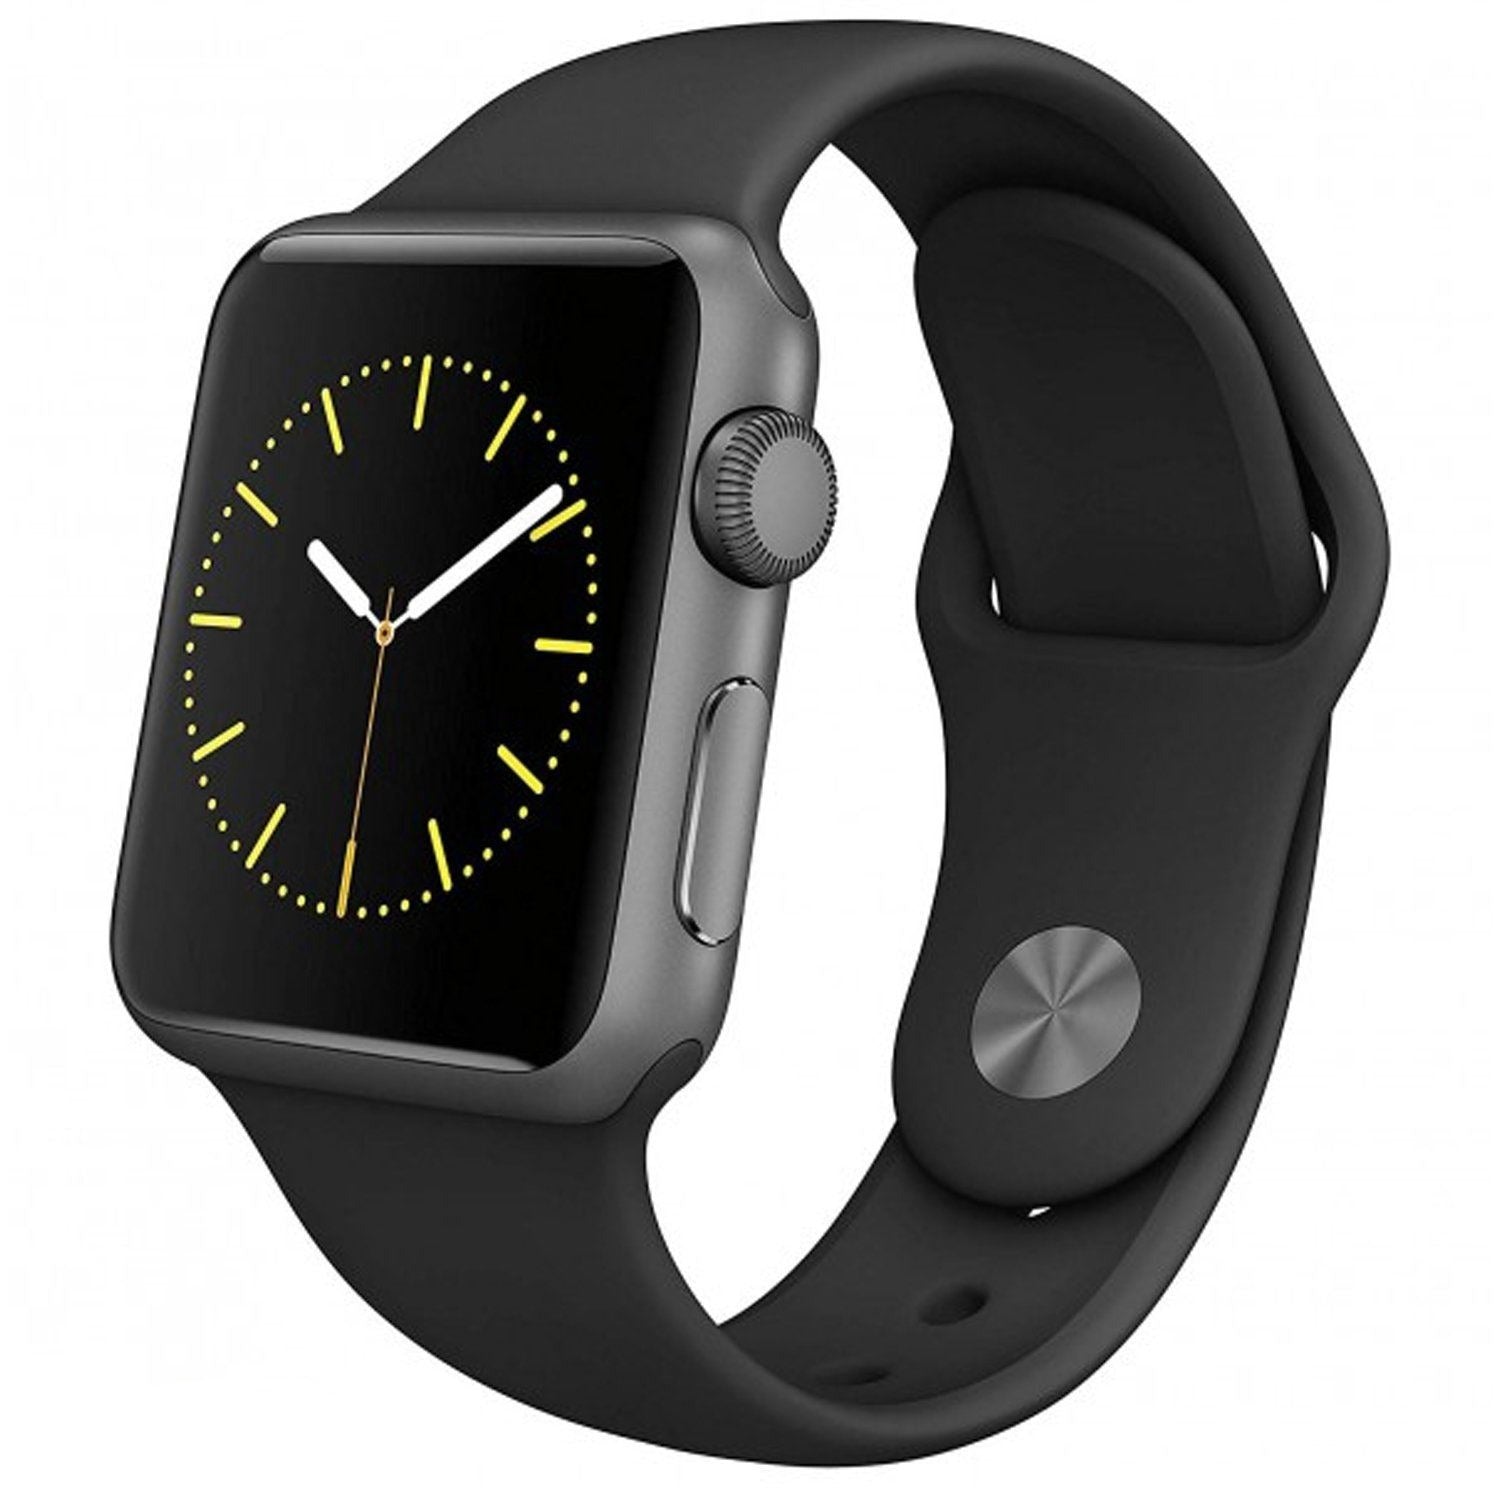 Apple Watch Smartwatch - Assorted Sizes and Colors / Gray / 42mm